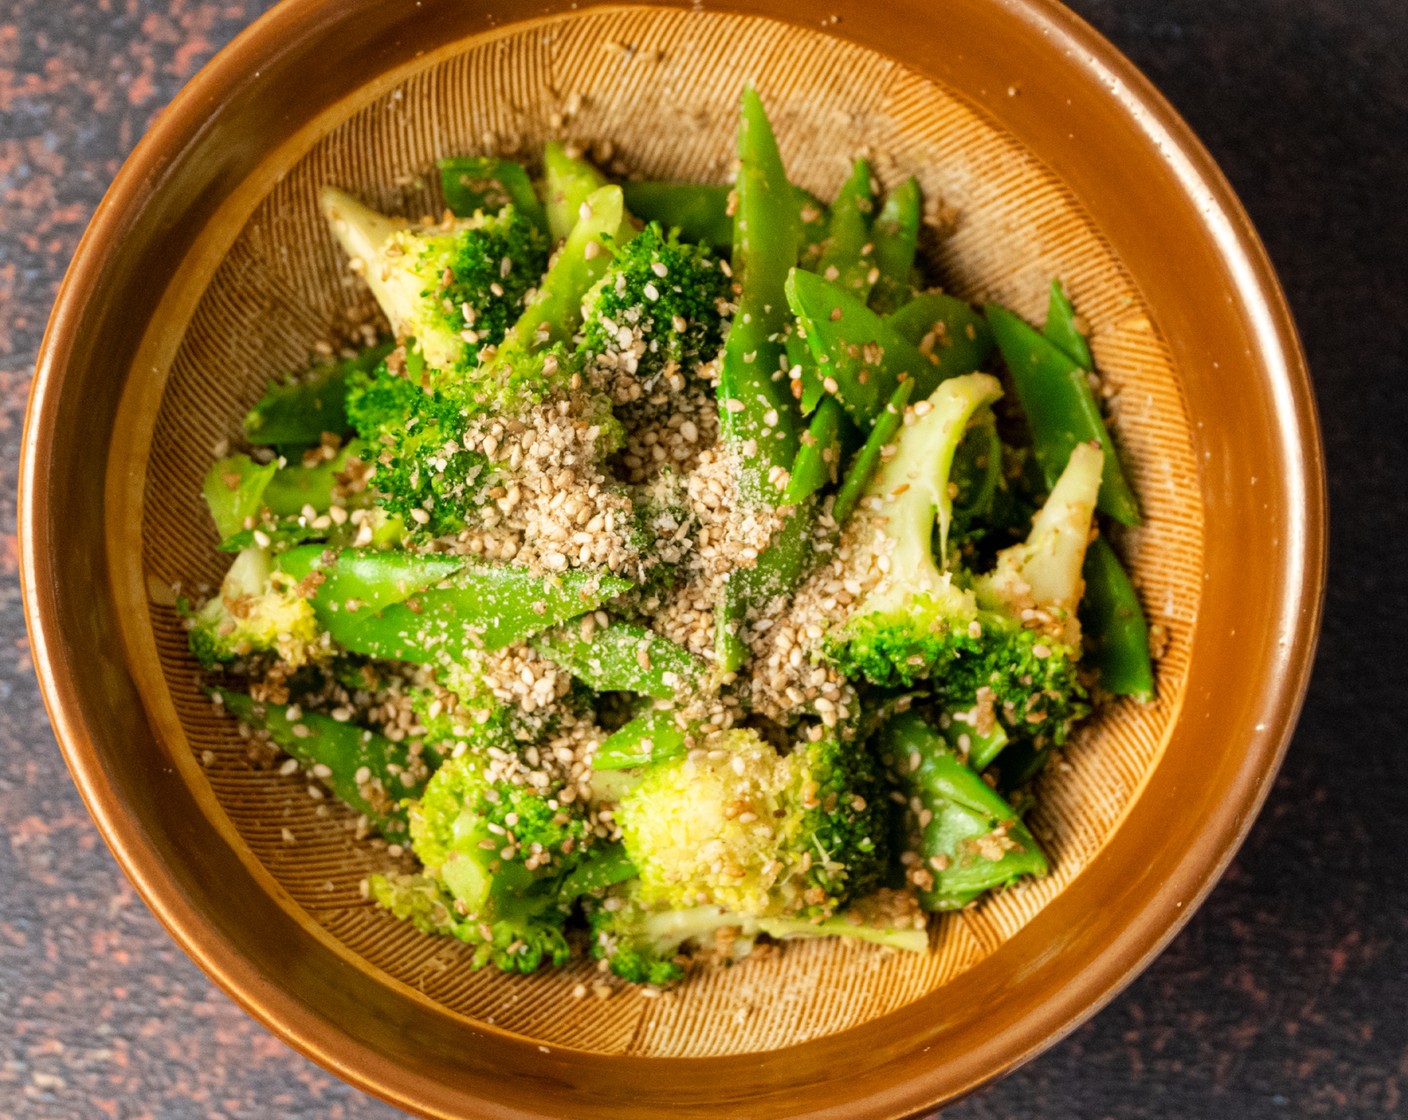 Goma-ae (Green Veggies with Aromatic Toasted Sesame)